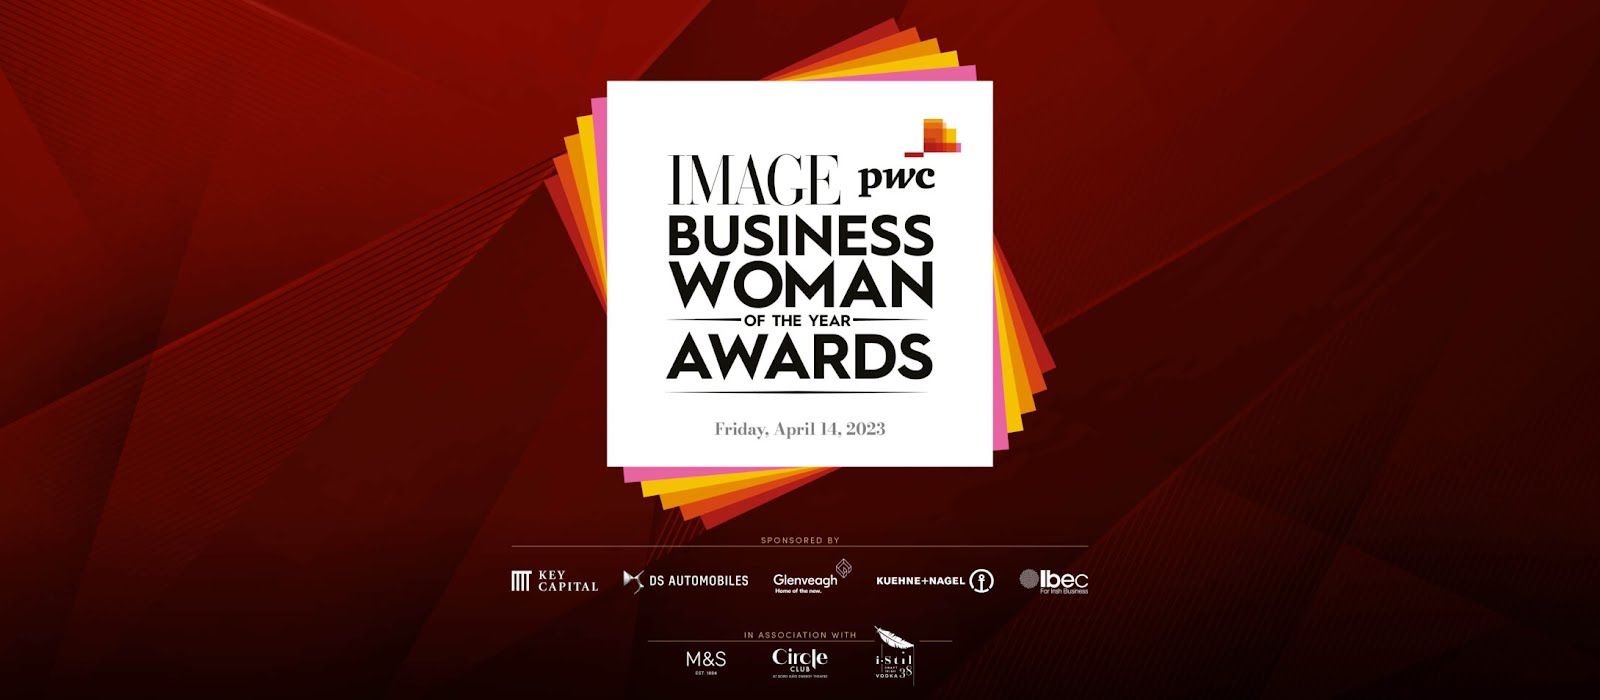 The IMAGE PwC Businesswoman of the Year Awards 2023 winners are…